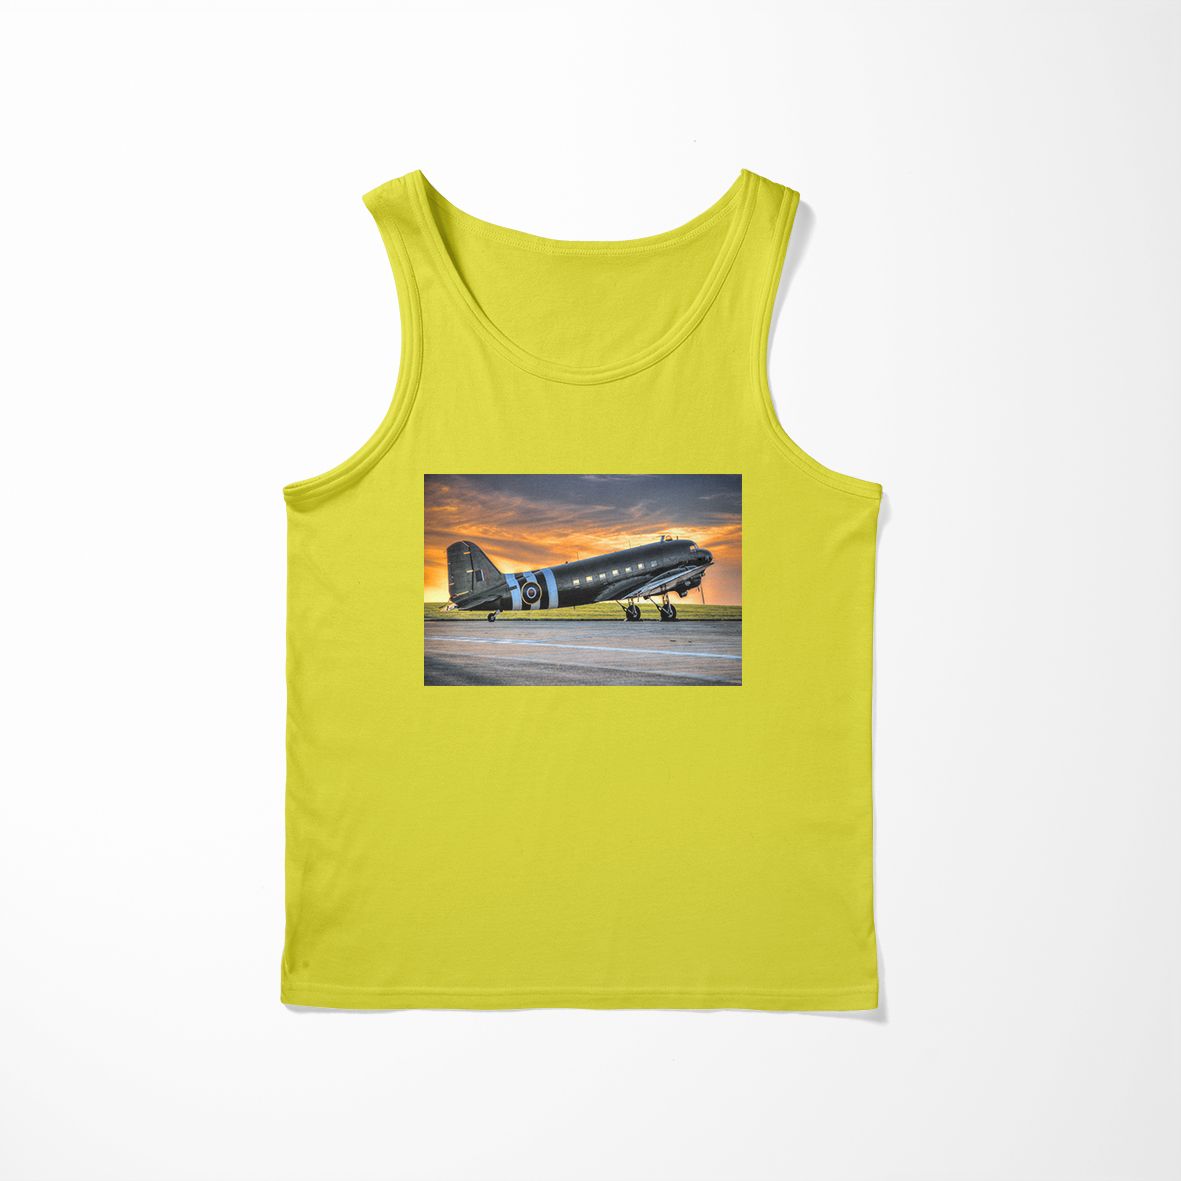 Old Airplane Parked During Sunset Designed Tank Tops